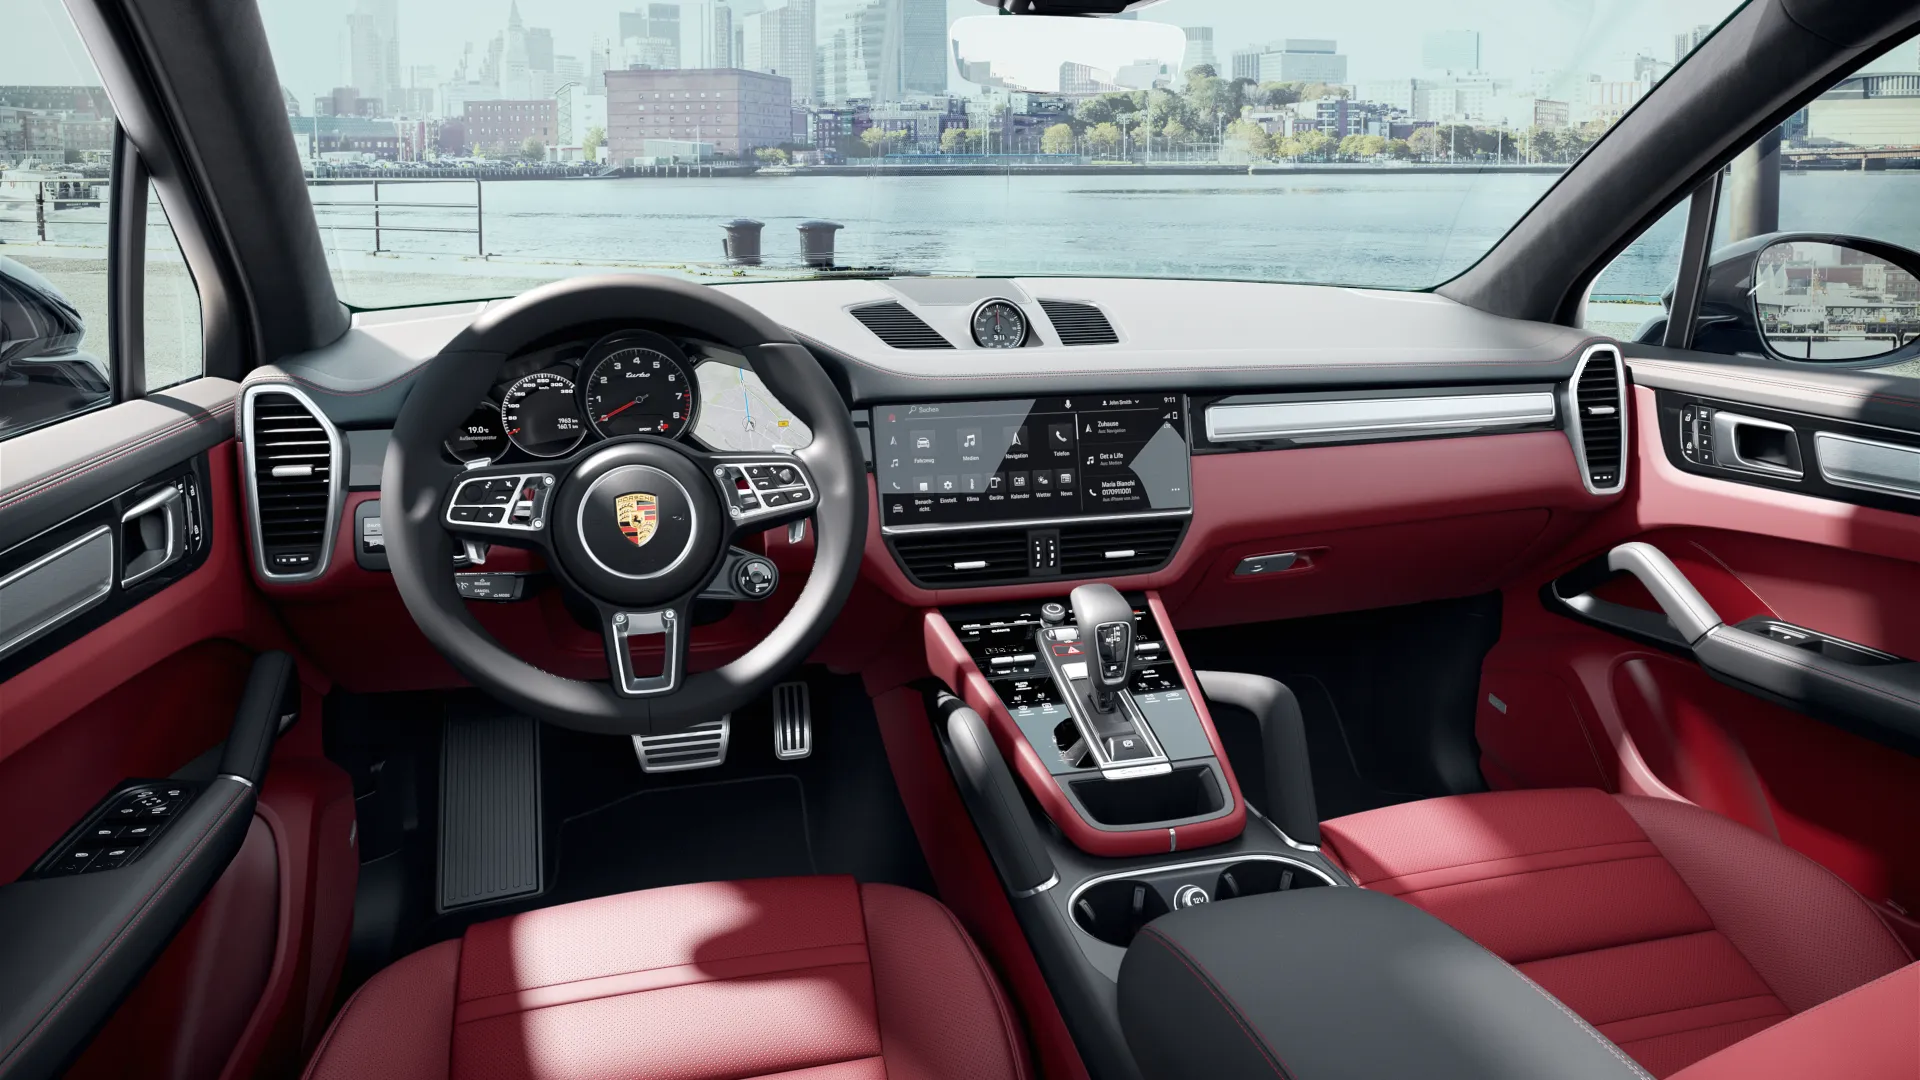 Interior view of Cayenne Turbo